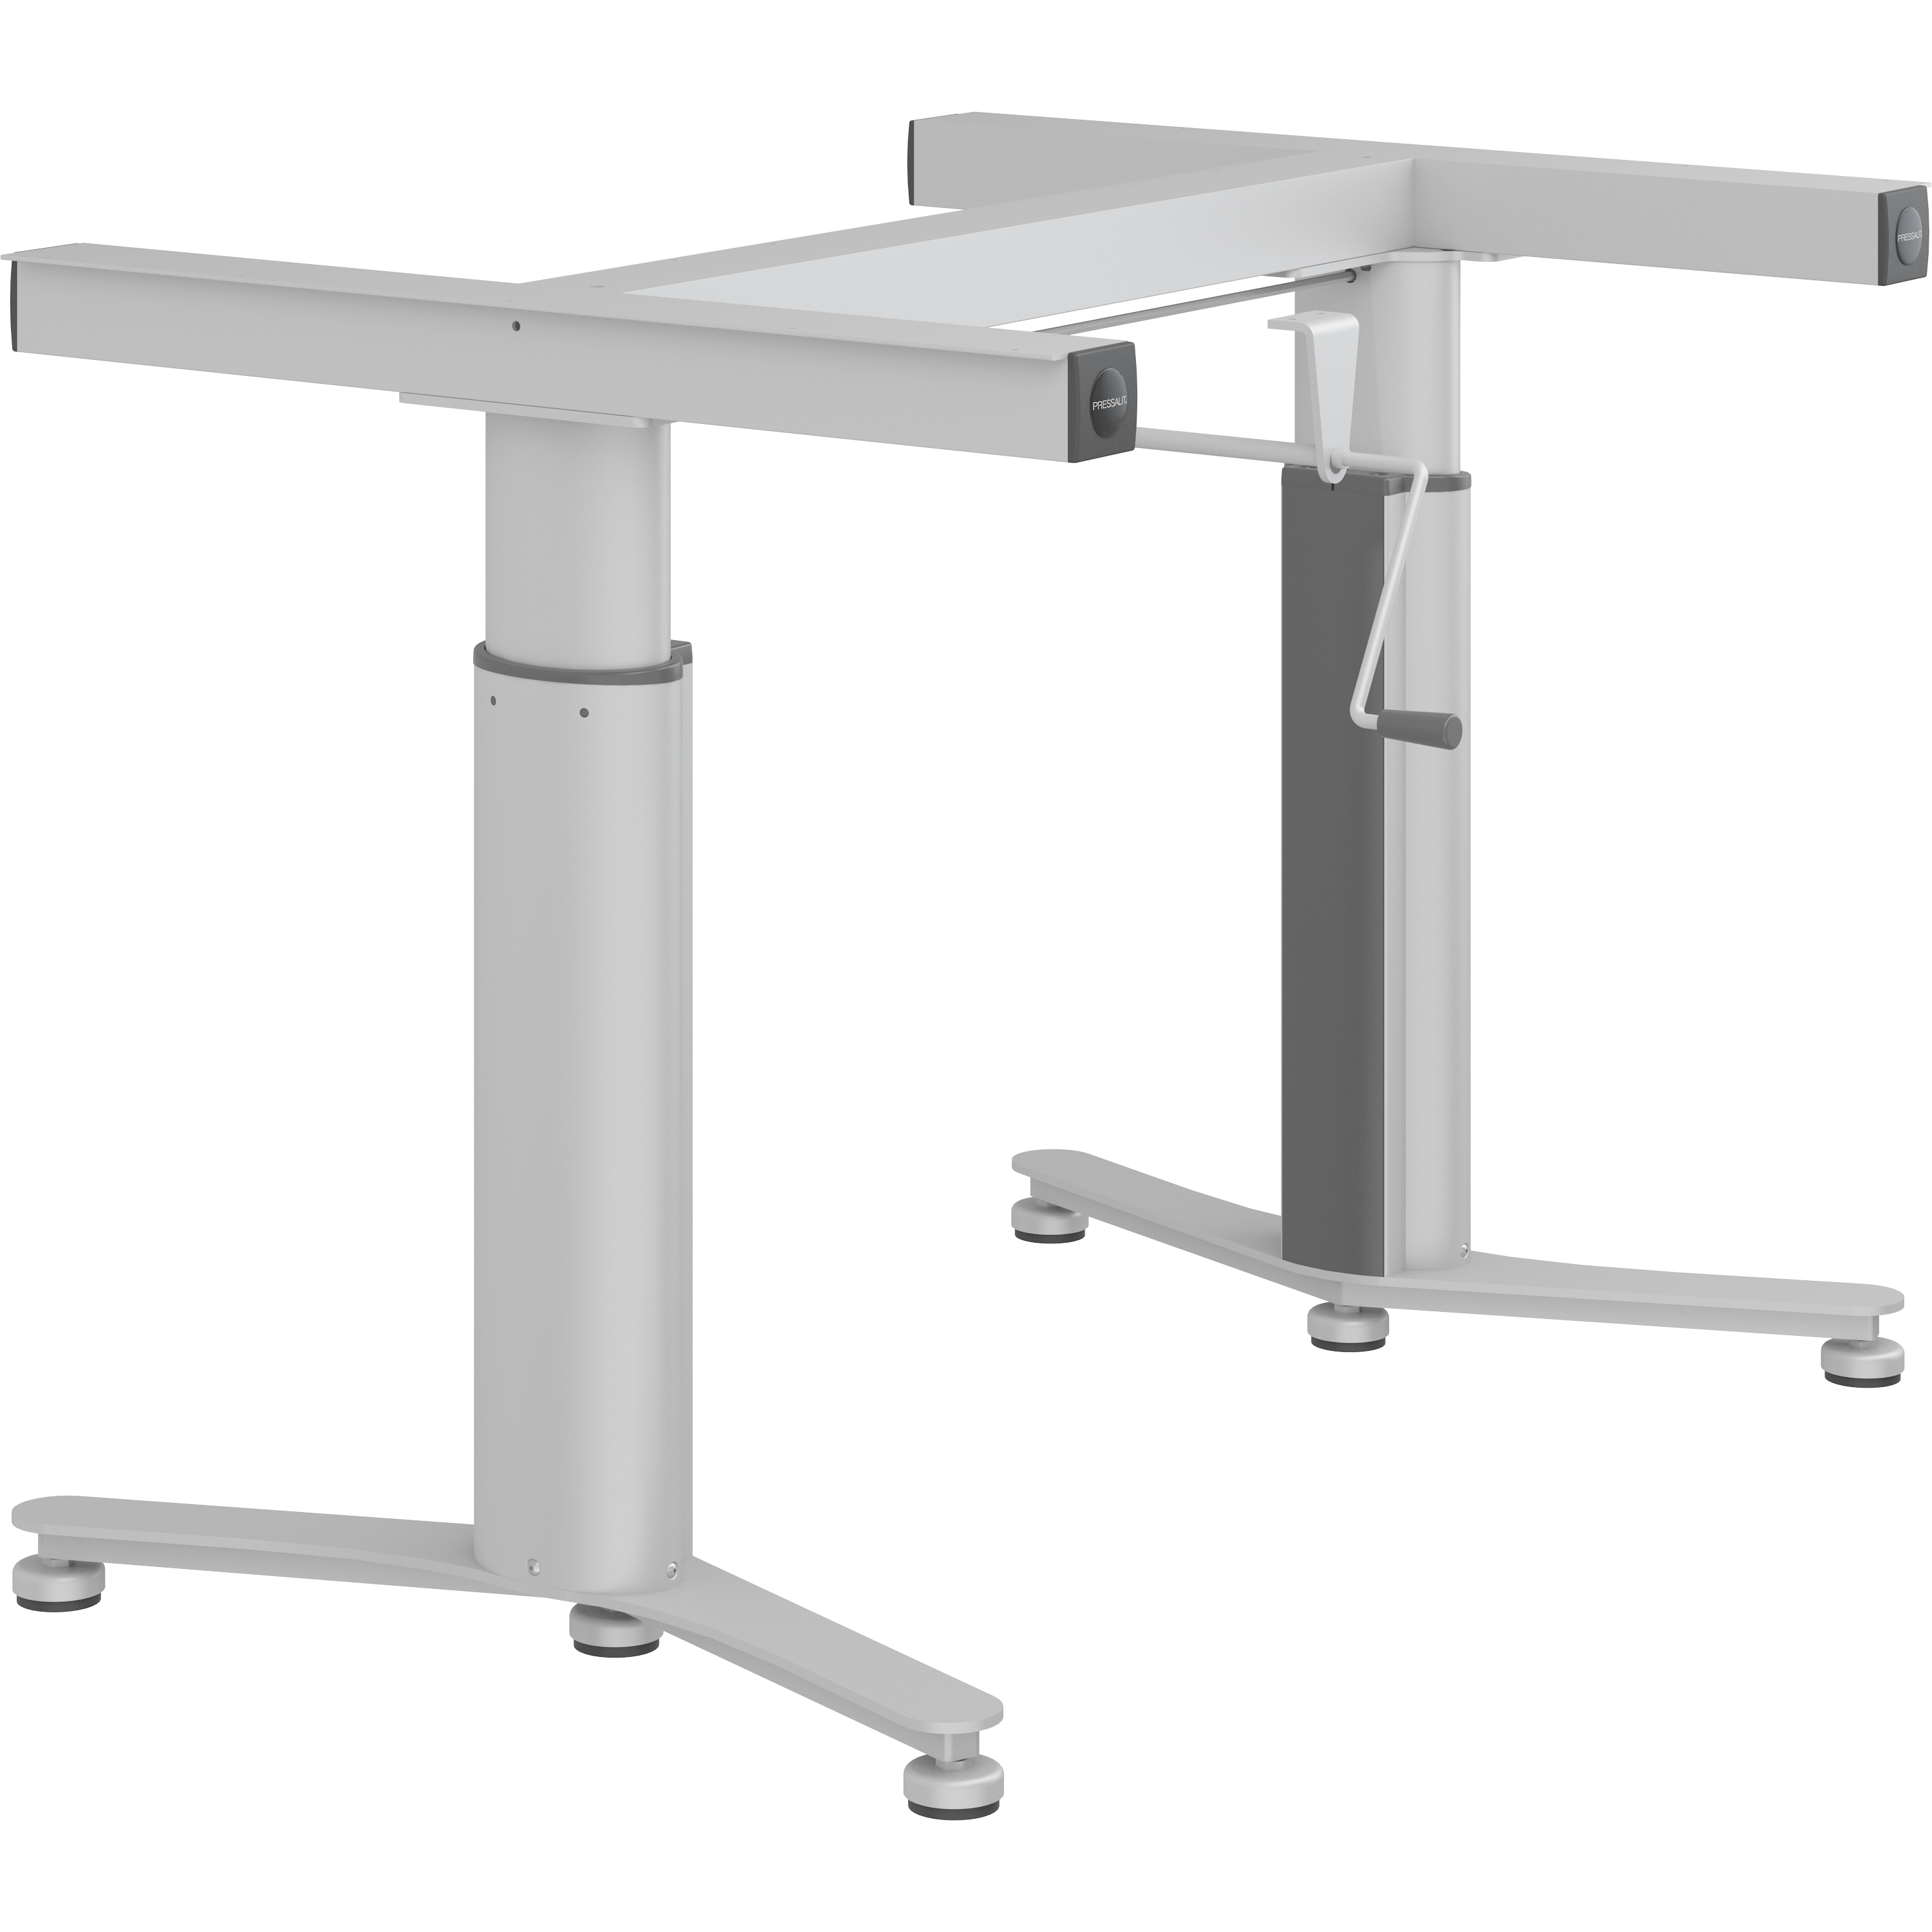 Lift for worktop, manually height adjustable